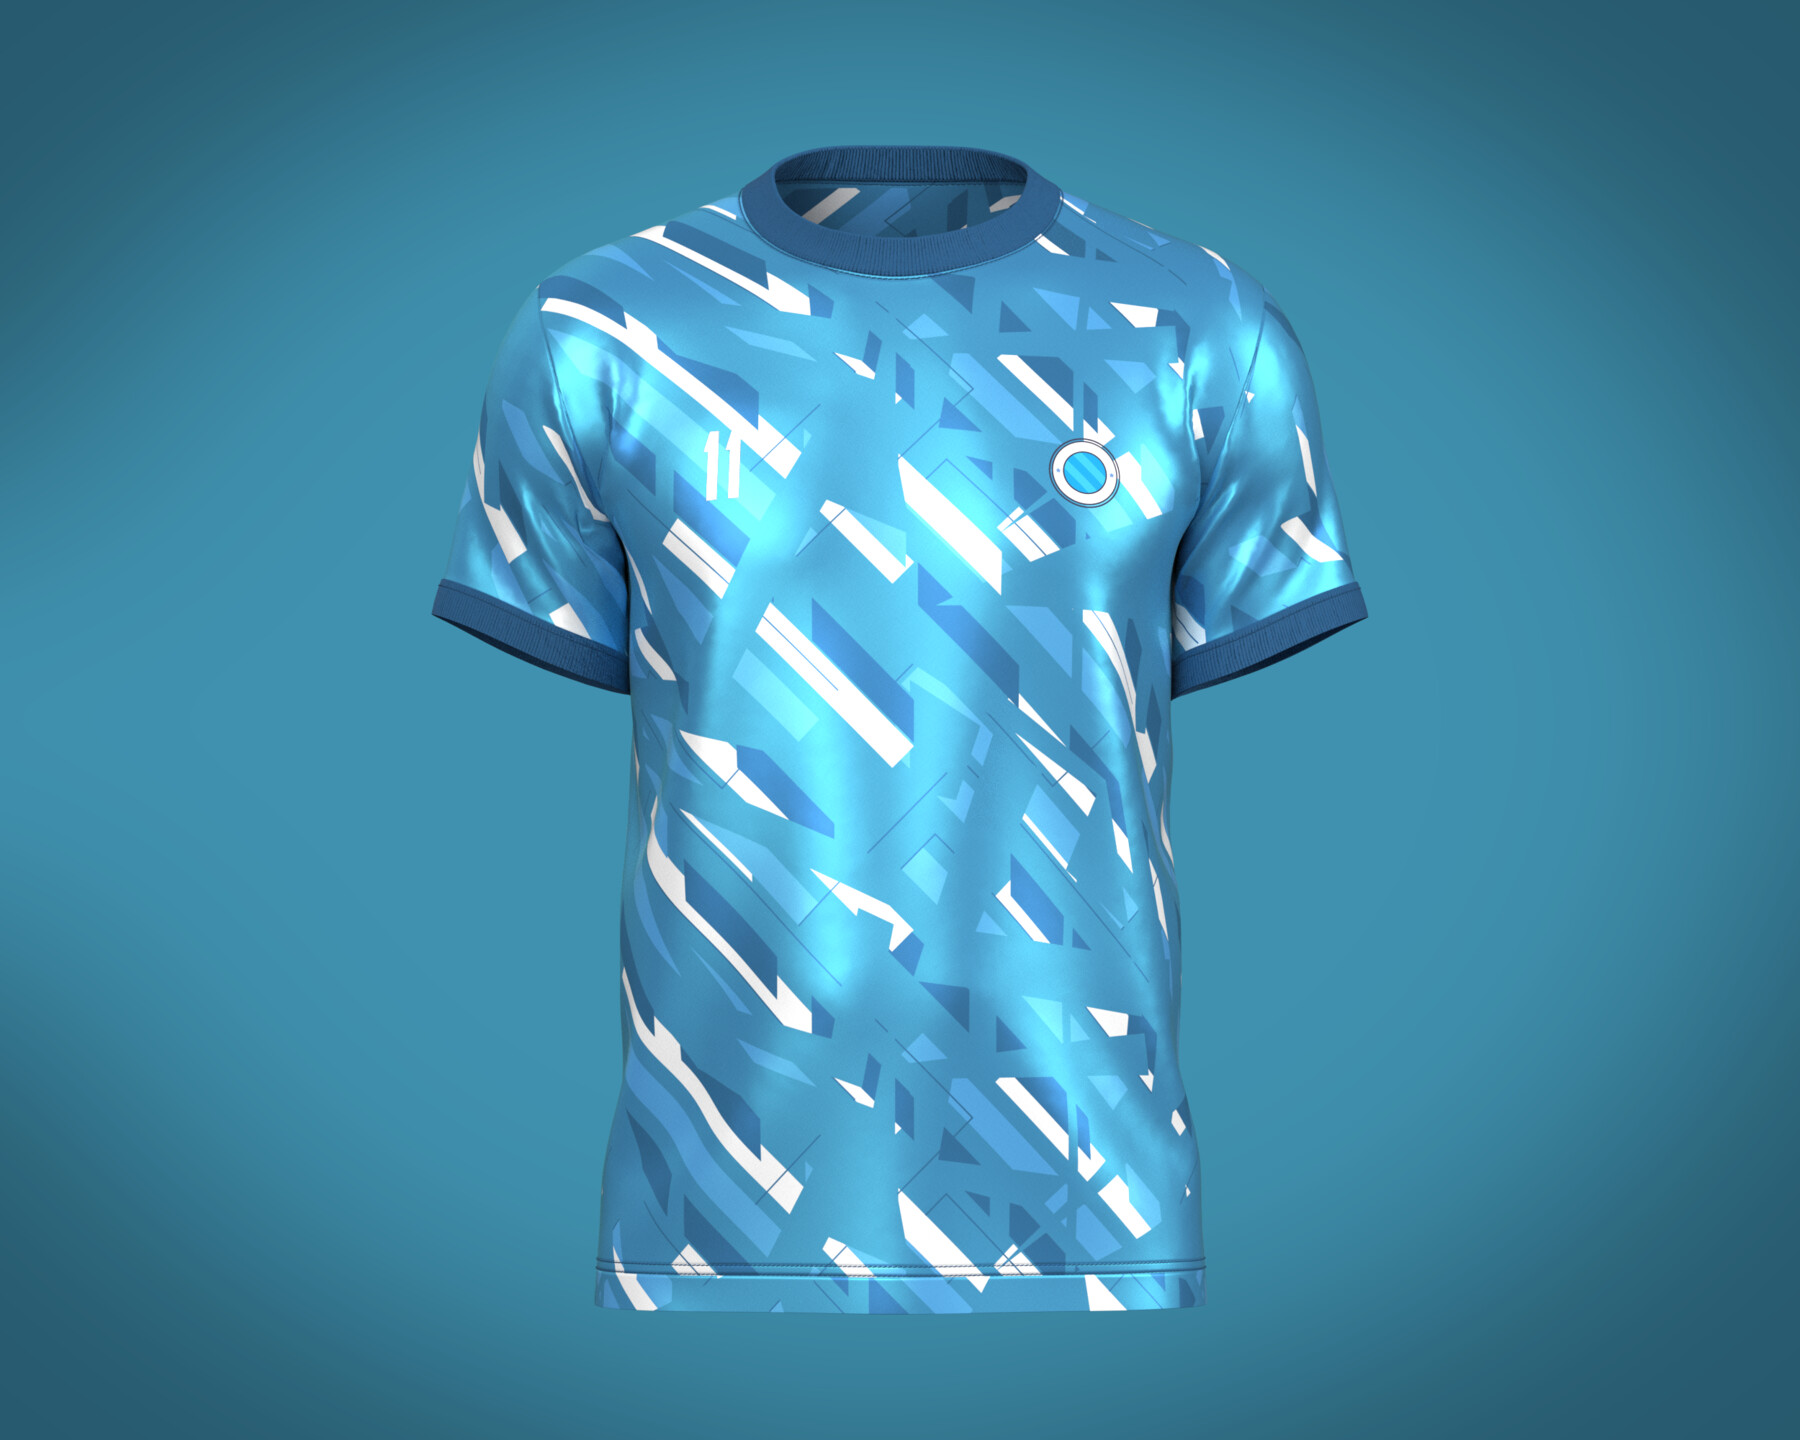 ArtStation - Soccer Football Sky Blue with white color Jersey Player-11